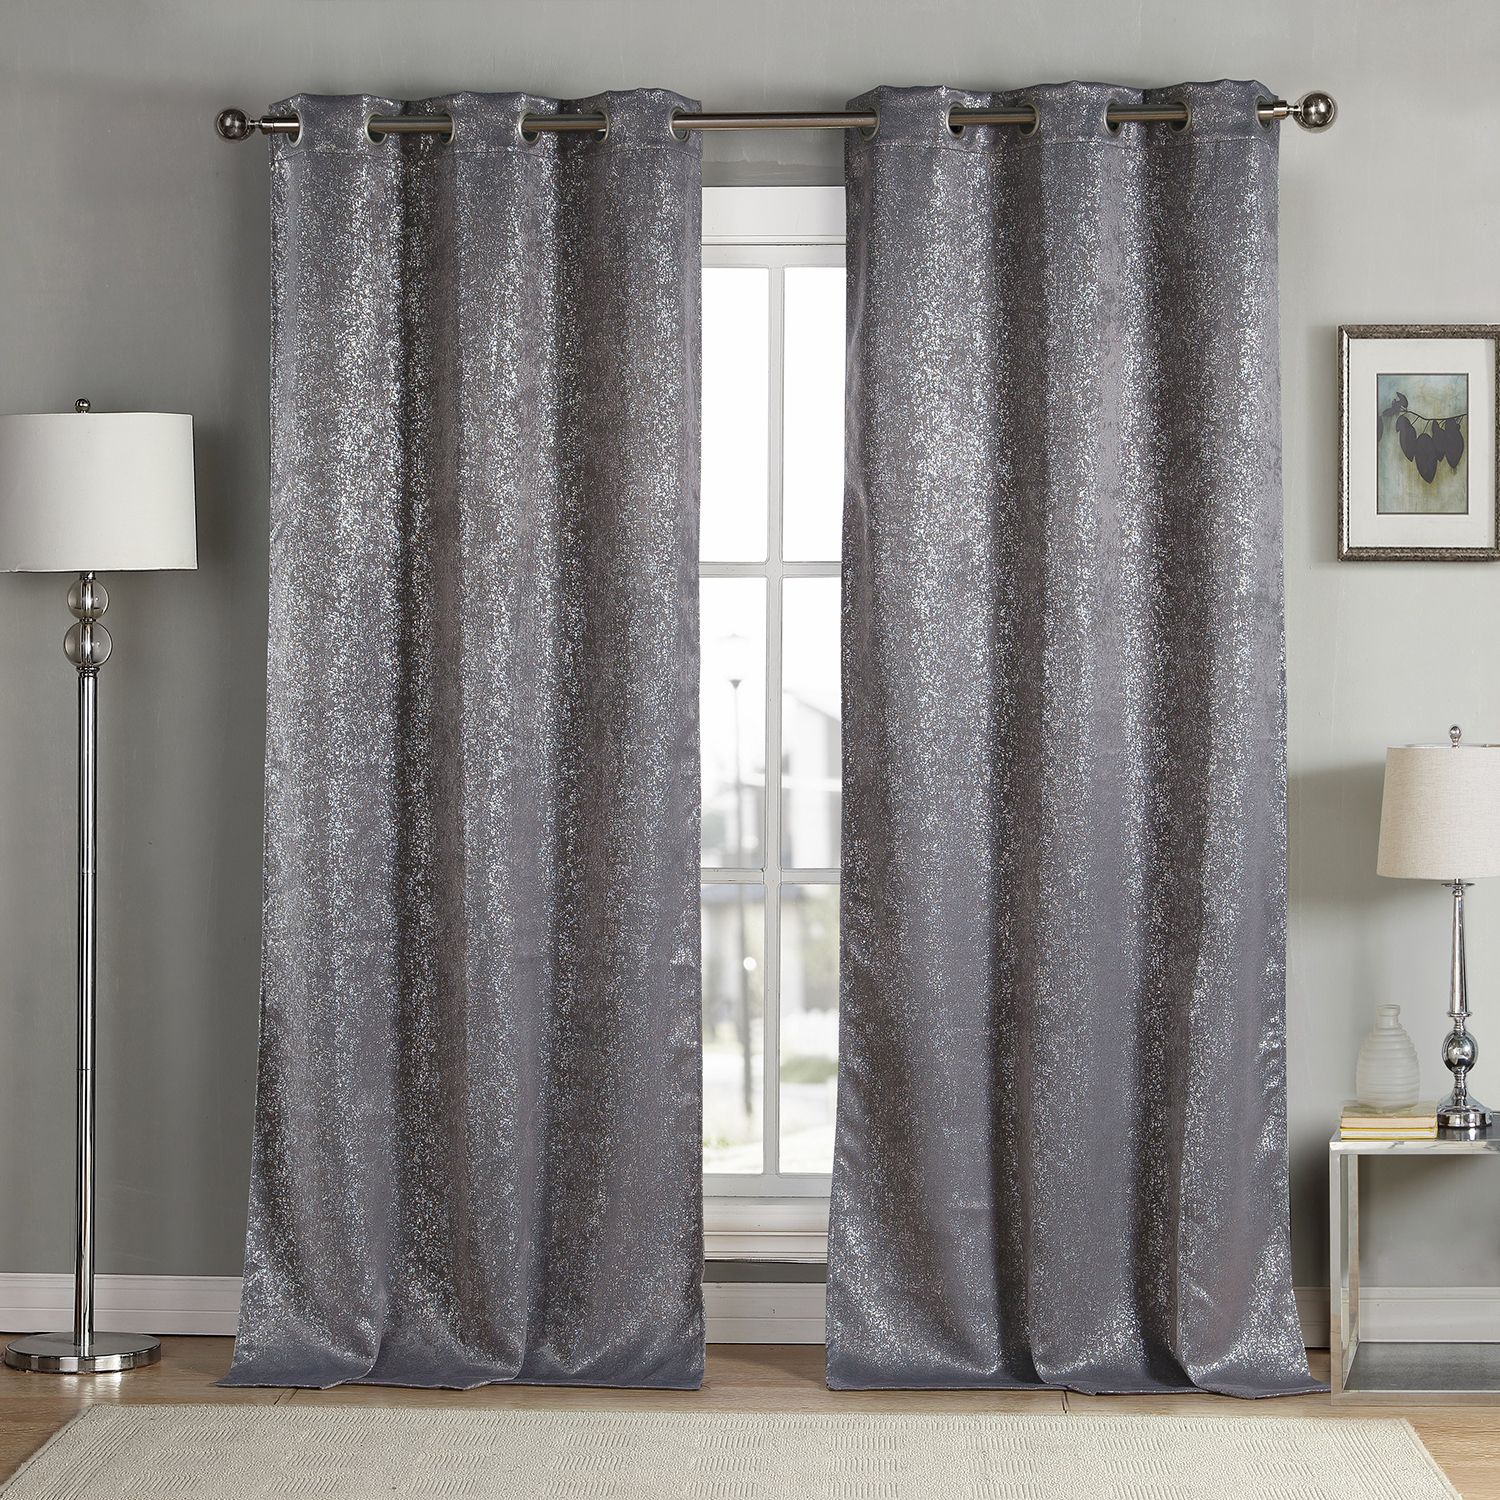 Image for Duck River Textile Maddie Metallic Blackout 2-pack Window Curtain Set at Kohl's.